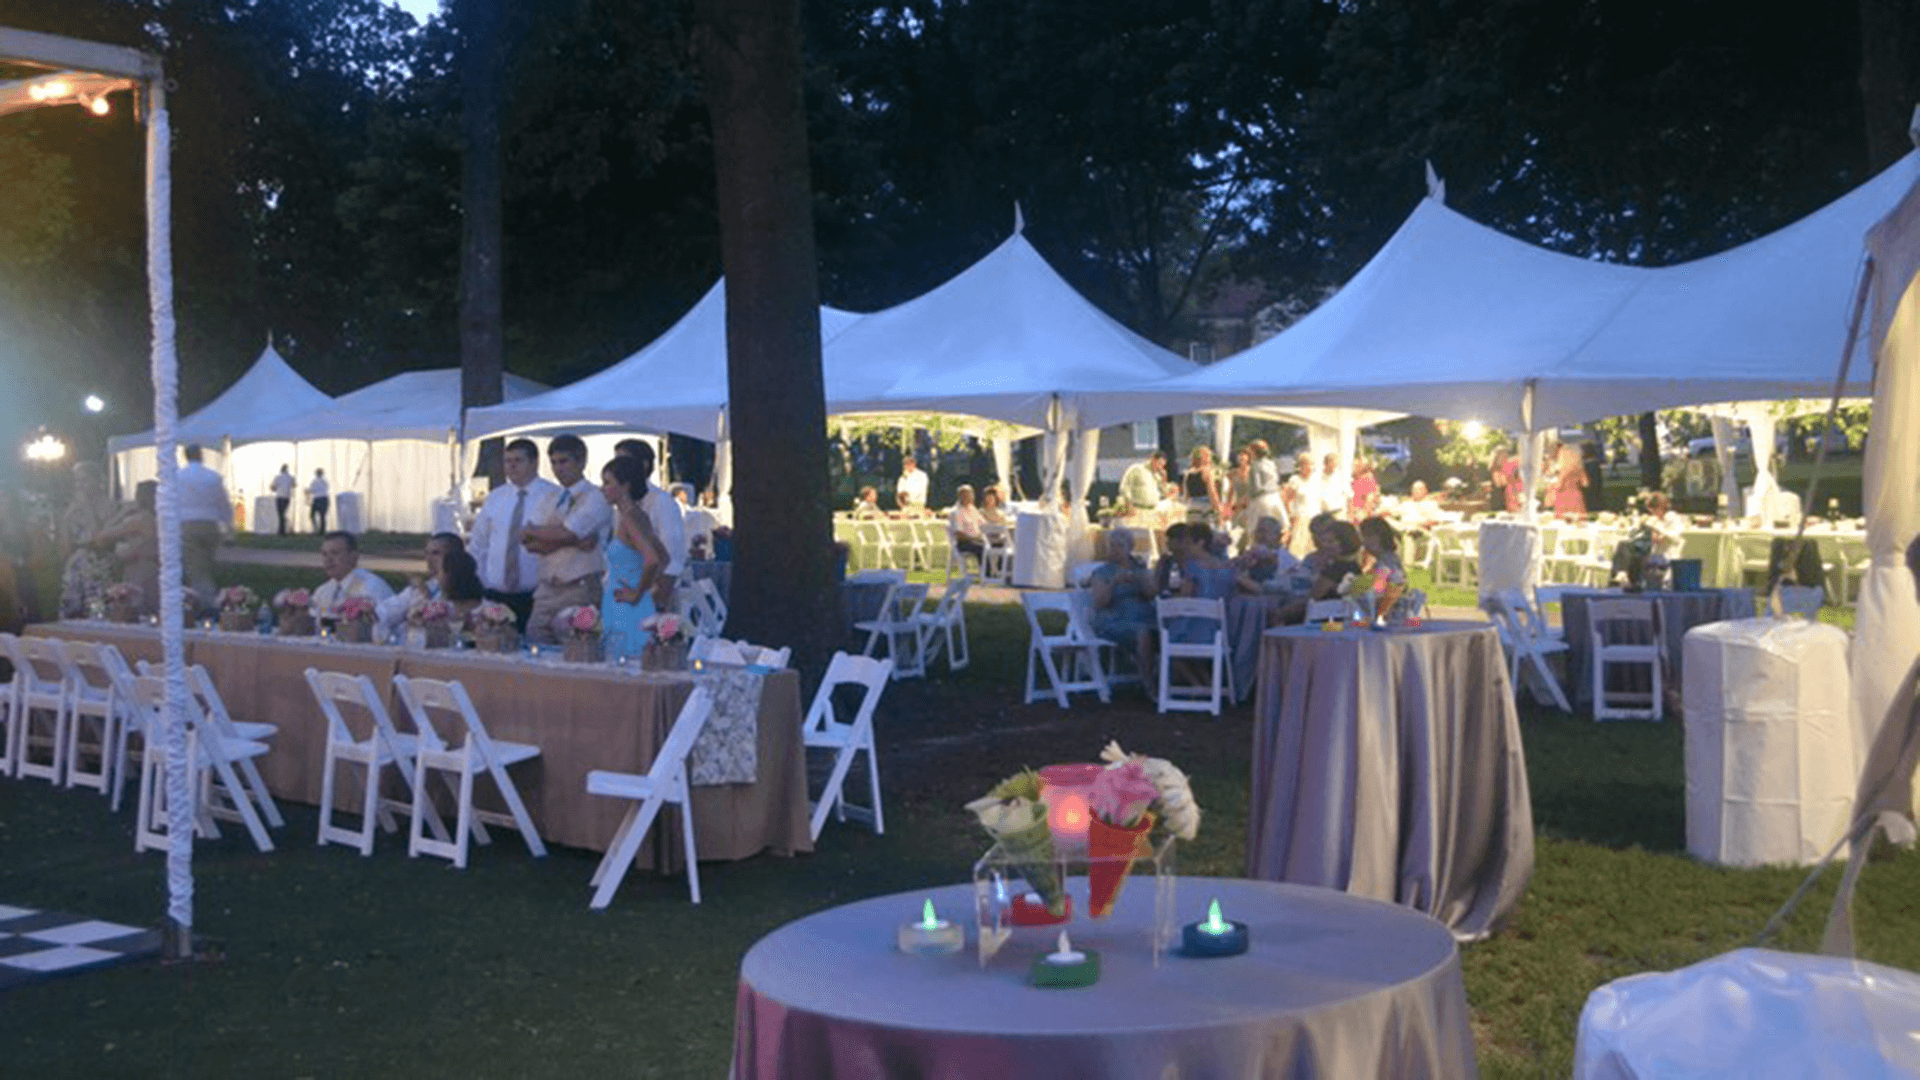 Busylad Rent-All provides tents and event decor for events like this outdoor wedding.